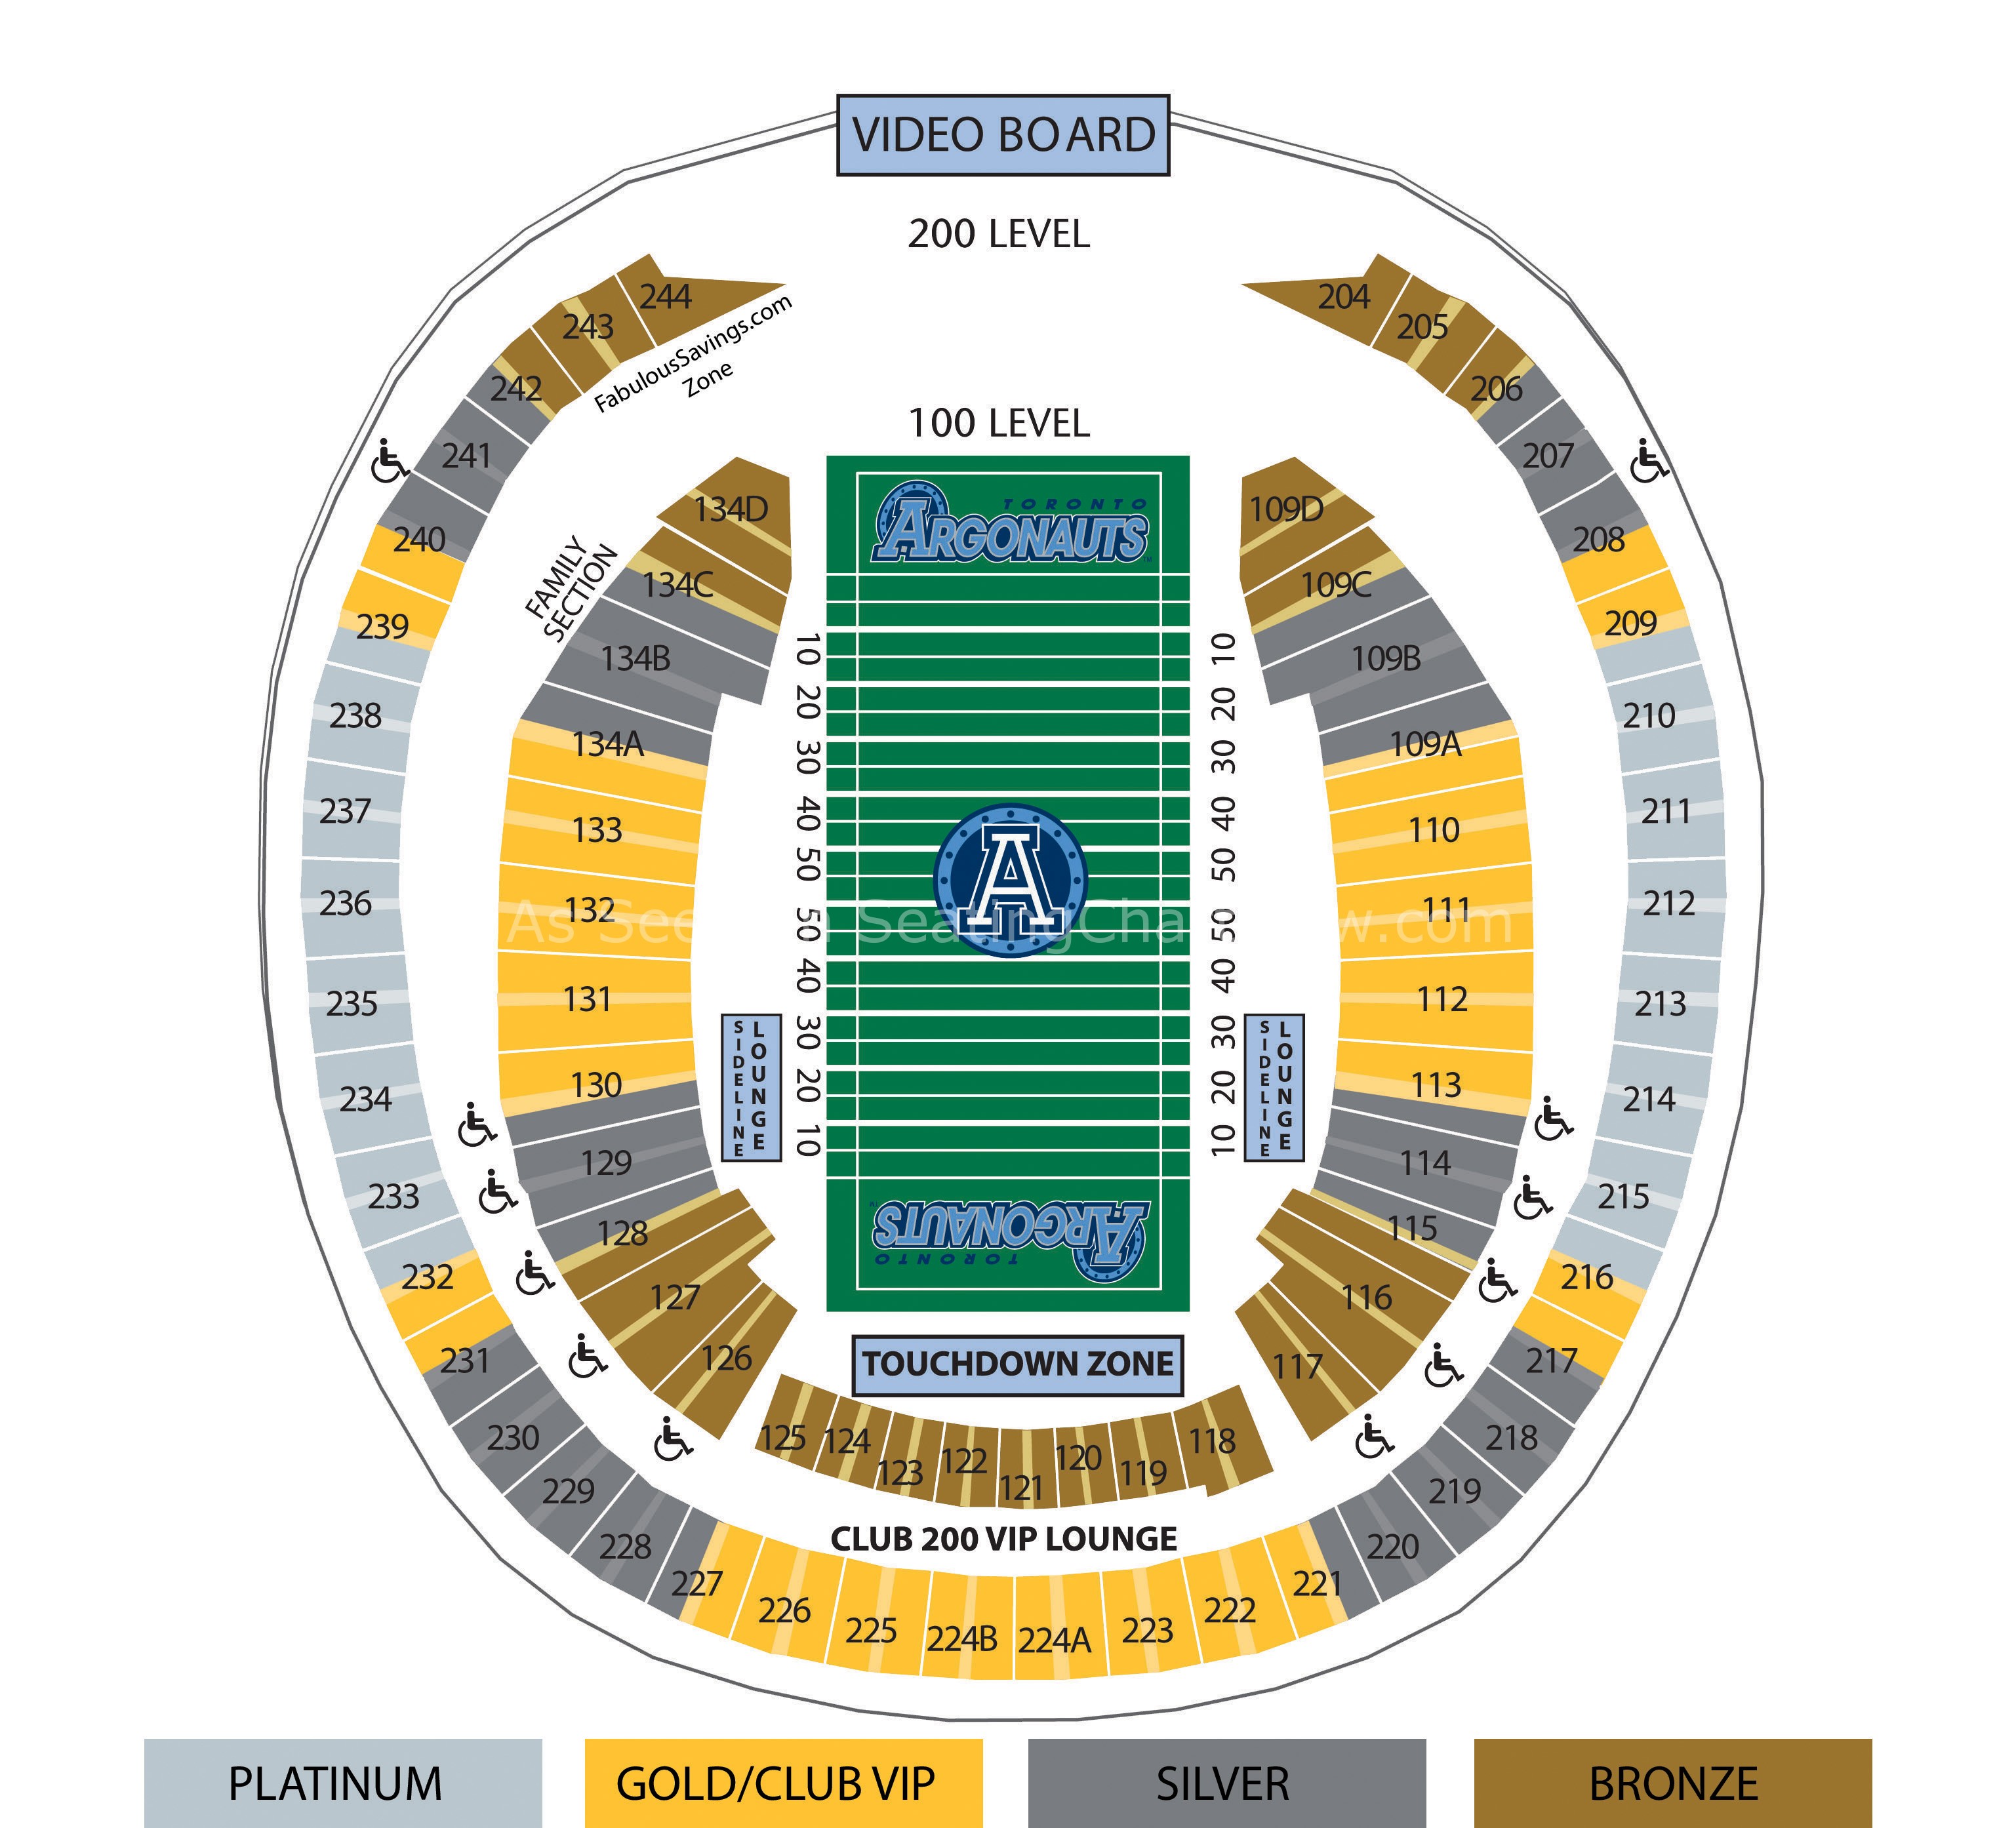 Rogers Dome Seating Chart